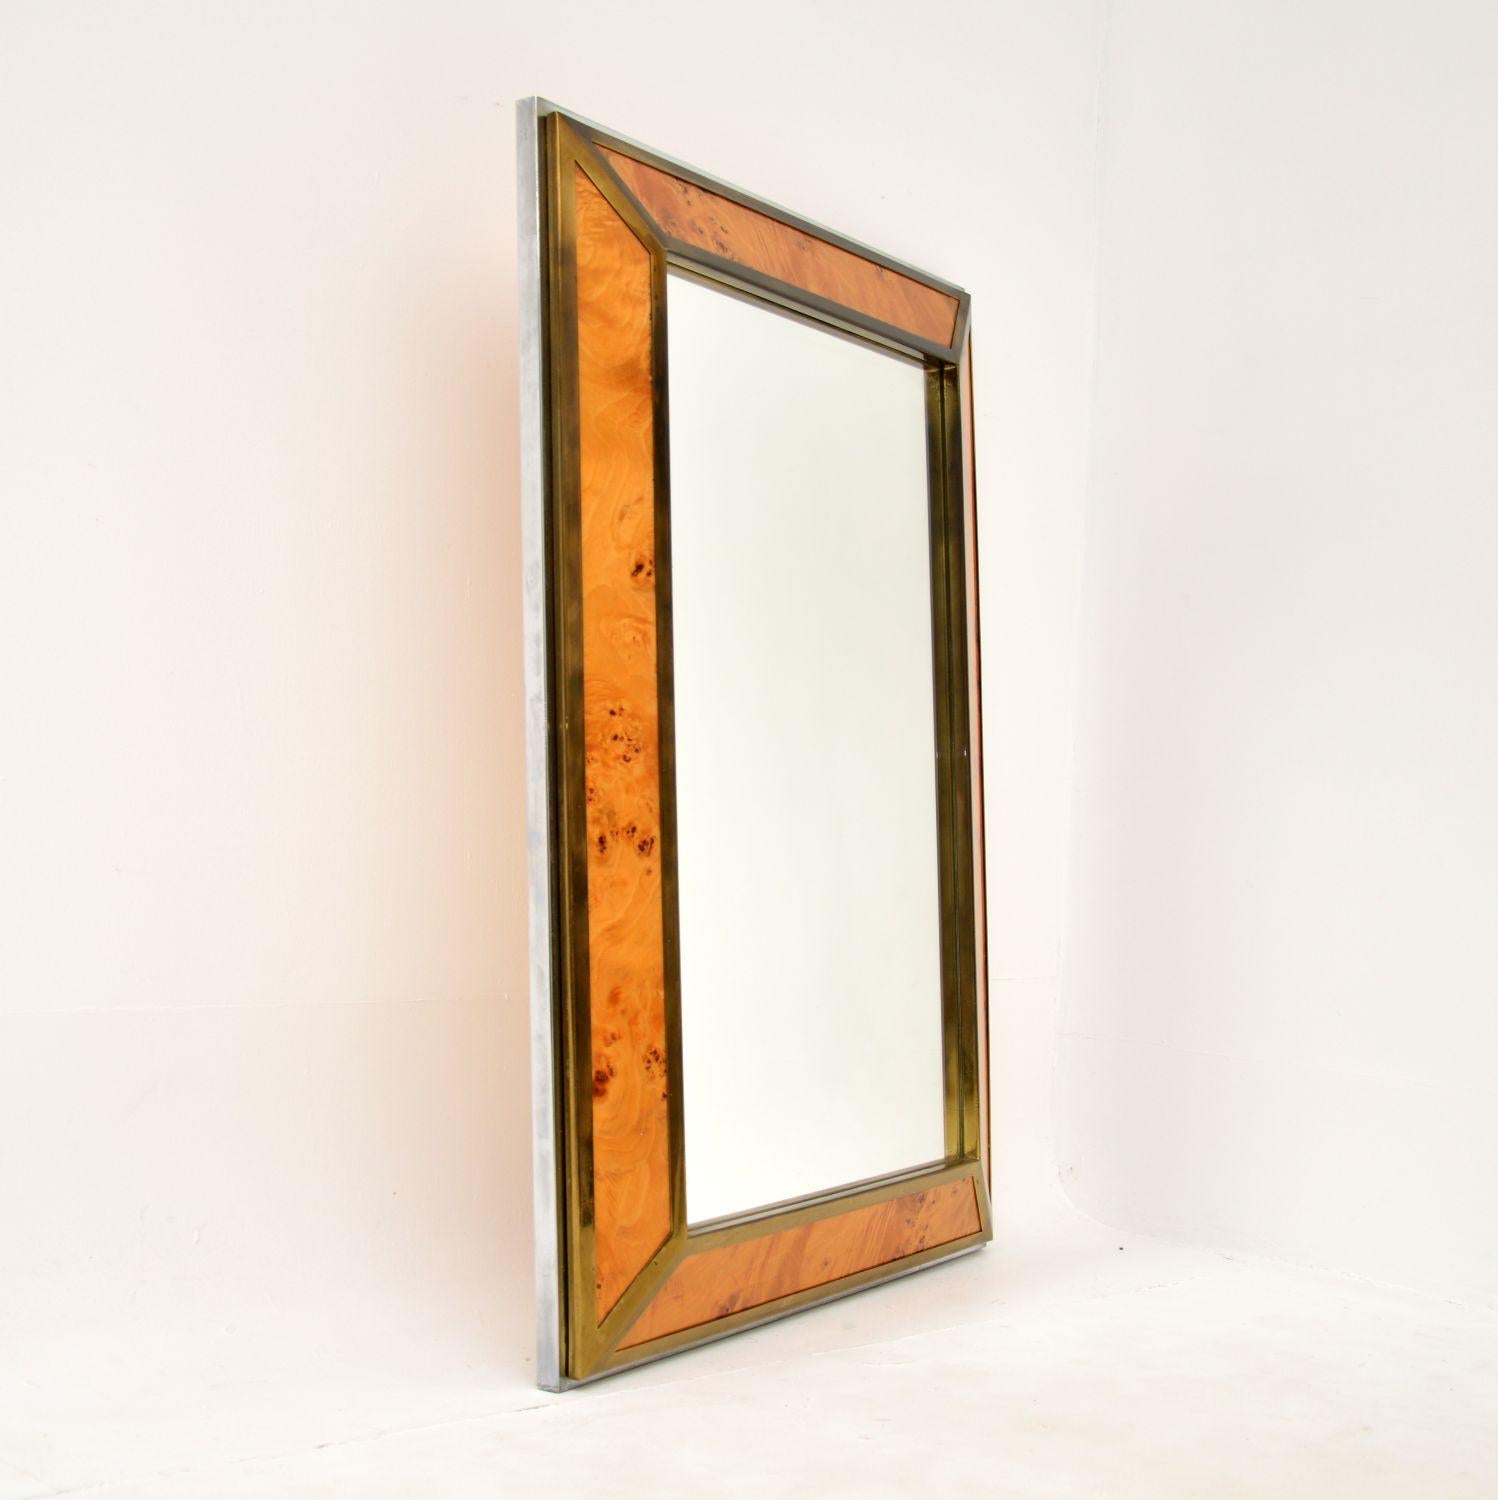 An extremely stylish and well made vintage Italian mirror, dating from the 1970s.

This is of superb quality, the frame is beautifully made from burr walnut, solid brass and chromed steel. The front tapers out, this has a very bold and impressive